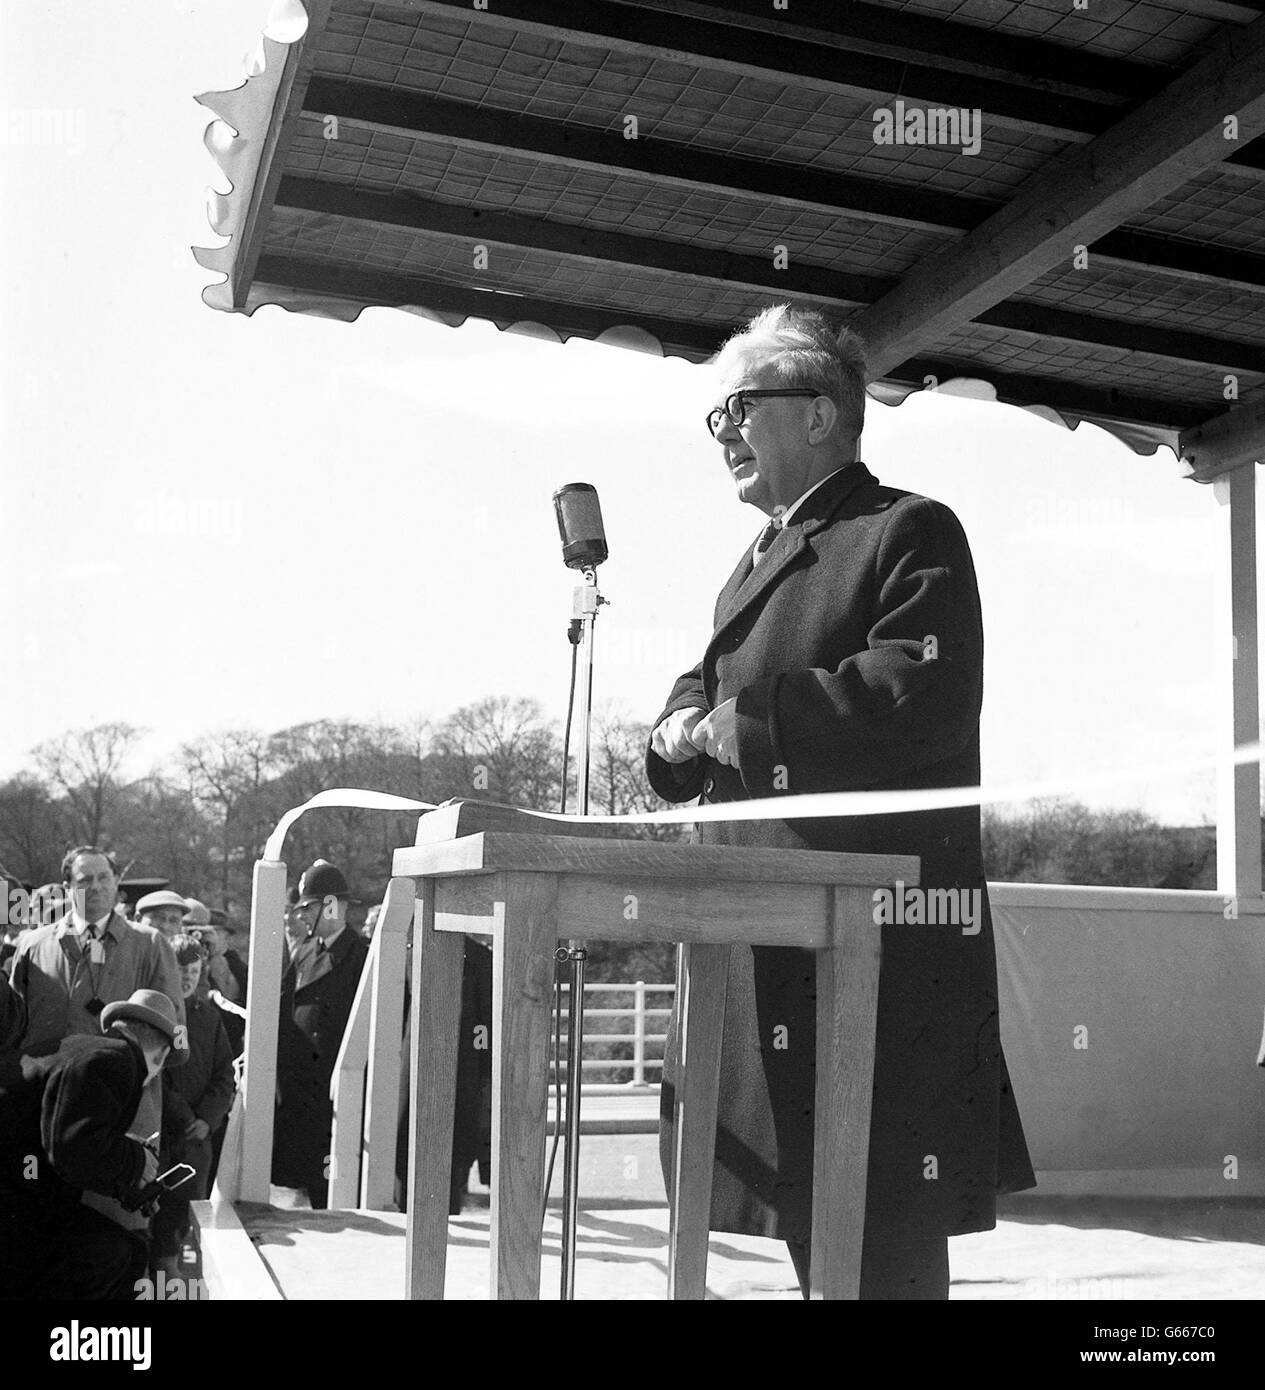 Dr Charles Hill, Chancellor of the Duchy of Lancaster, as he opened the M6 Lancaster by-pass. The Lancaster motorway, as it is known, is 11 1/2 miles long and together with Preston motorway, opened in 1958, will eventually form part of the M6 motorway from Birmingham to Penrith. Stock Photo